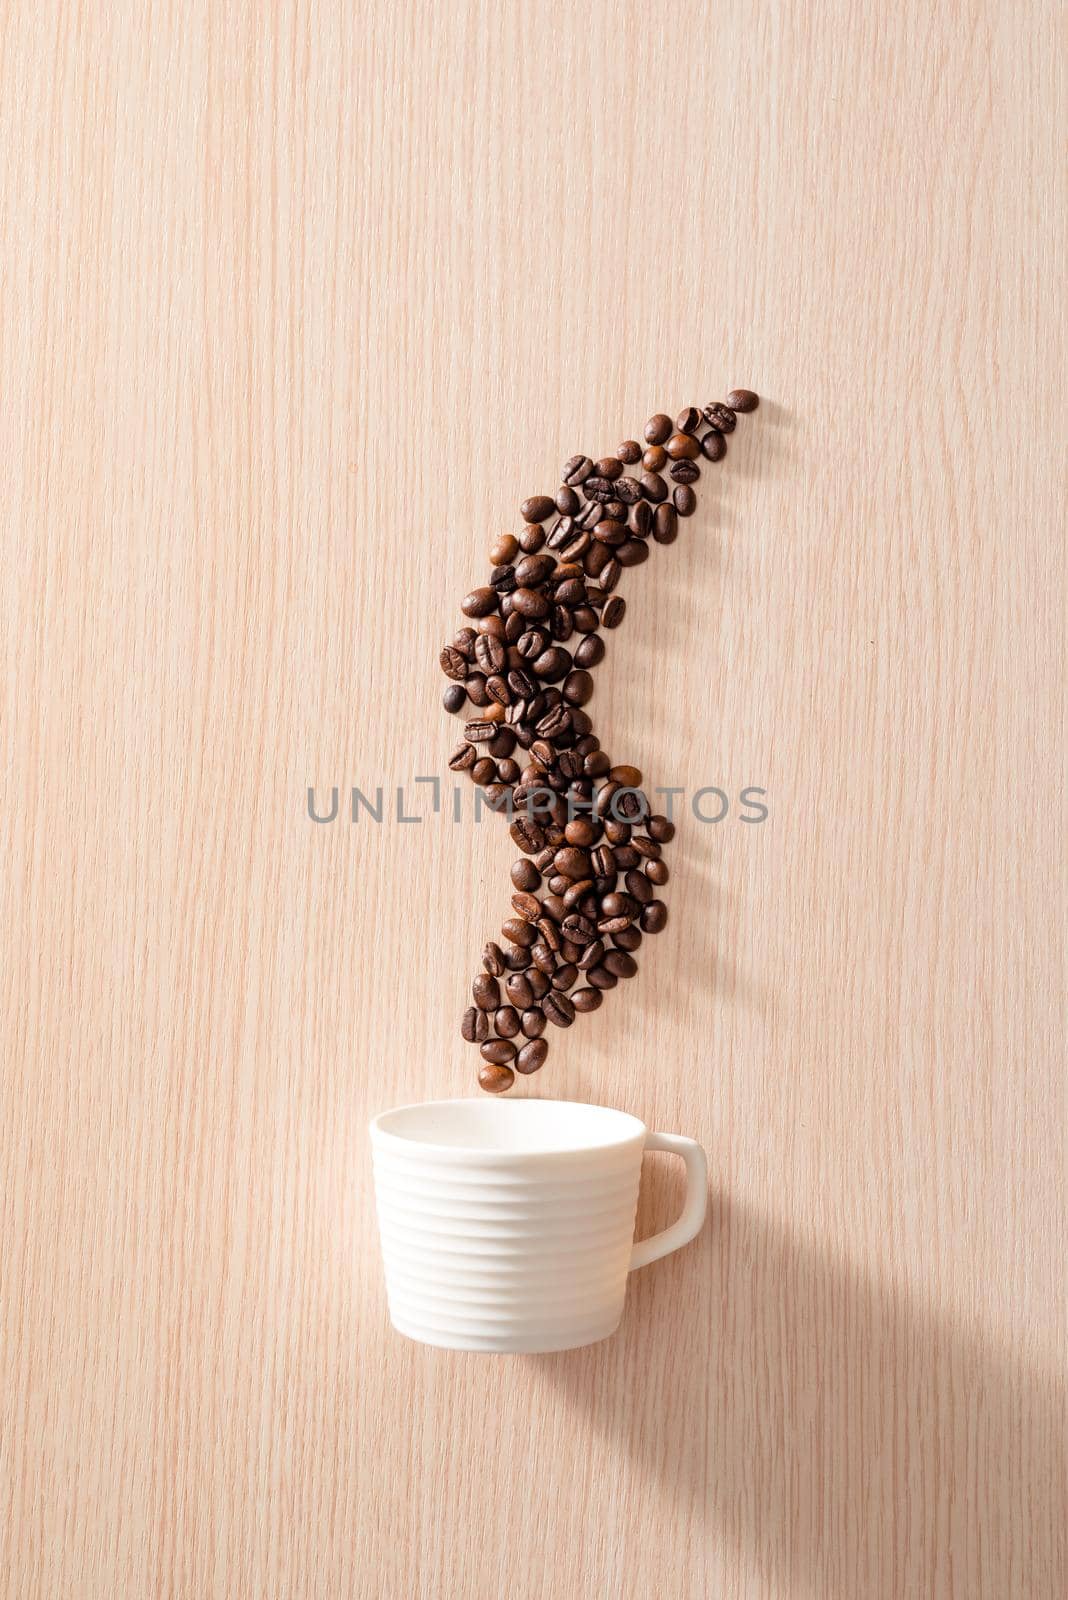 A white cup with smoke shape coffee beans on wooden background